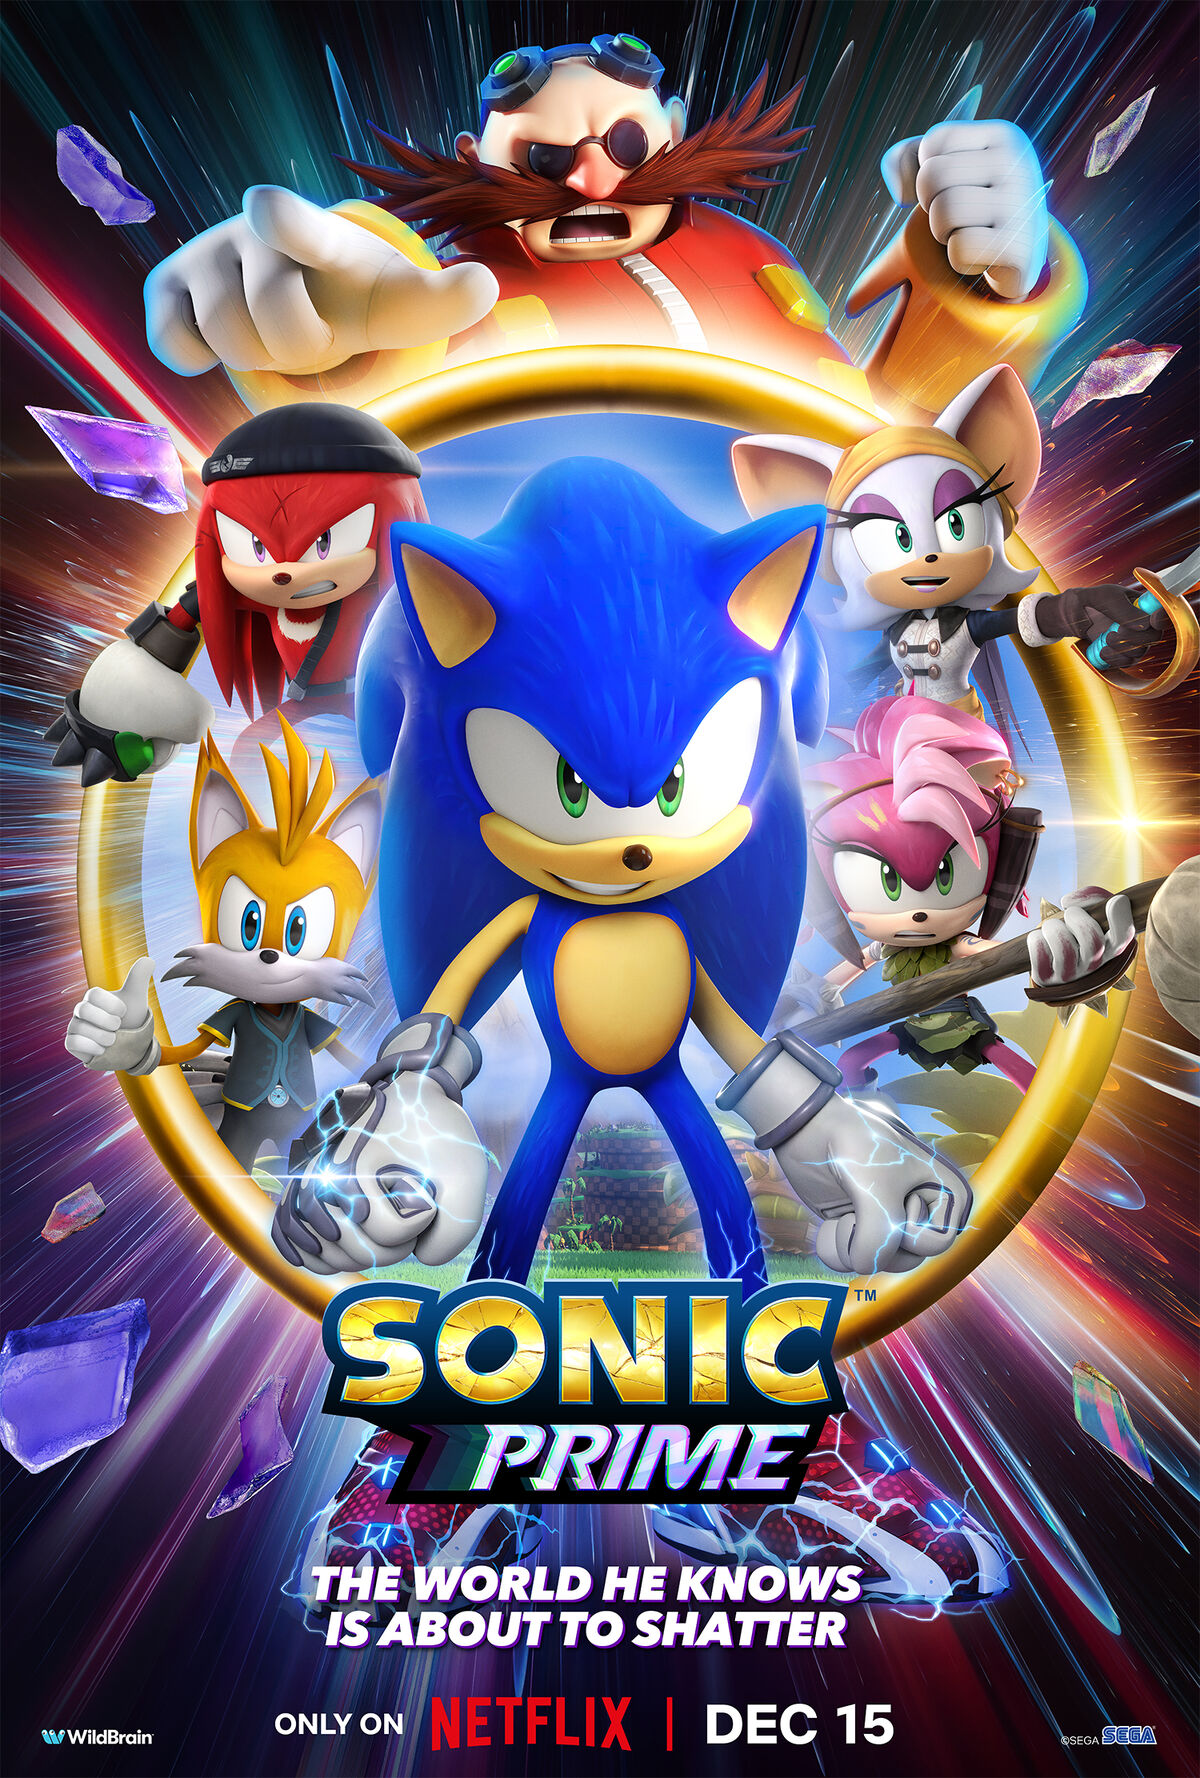 Is There a Sonic Prime Season 2 Release Date on Netflix